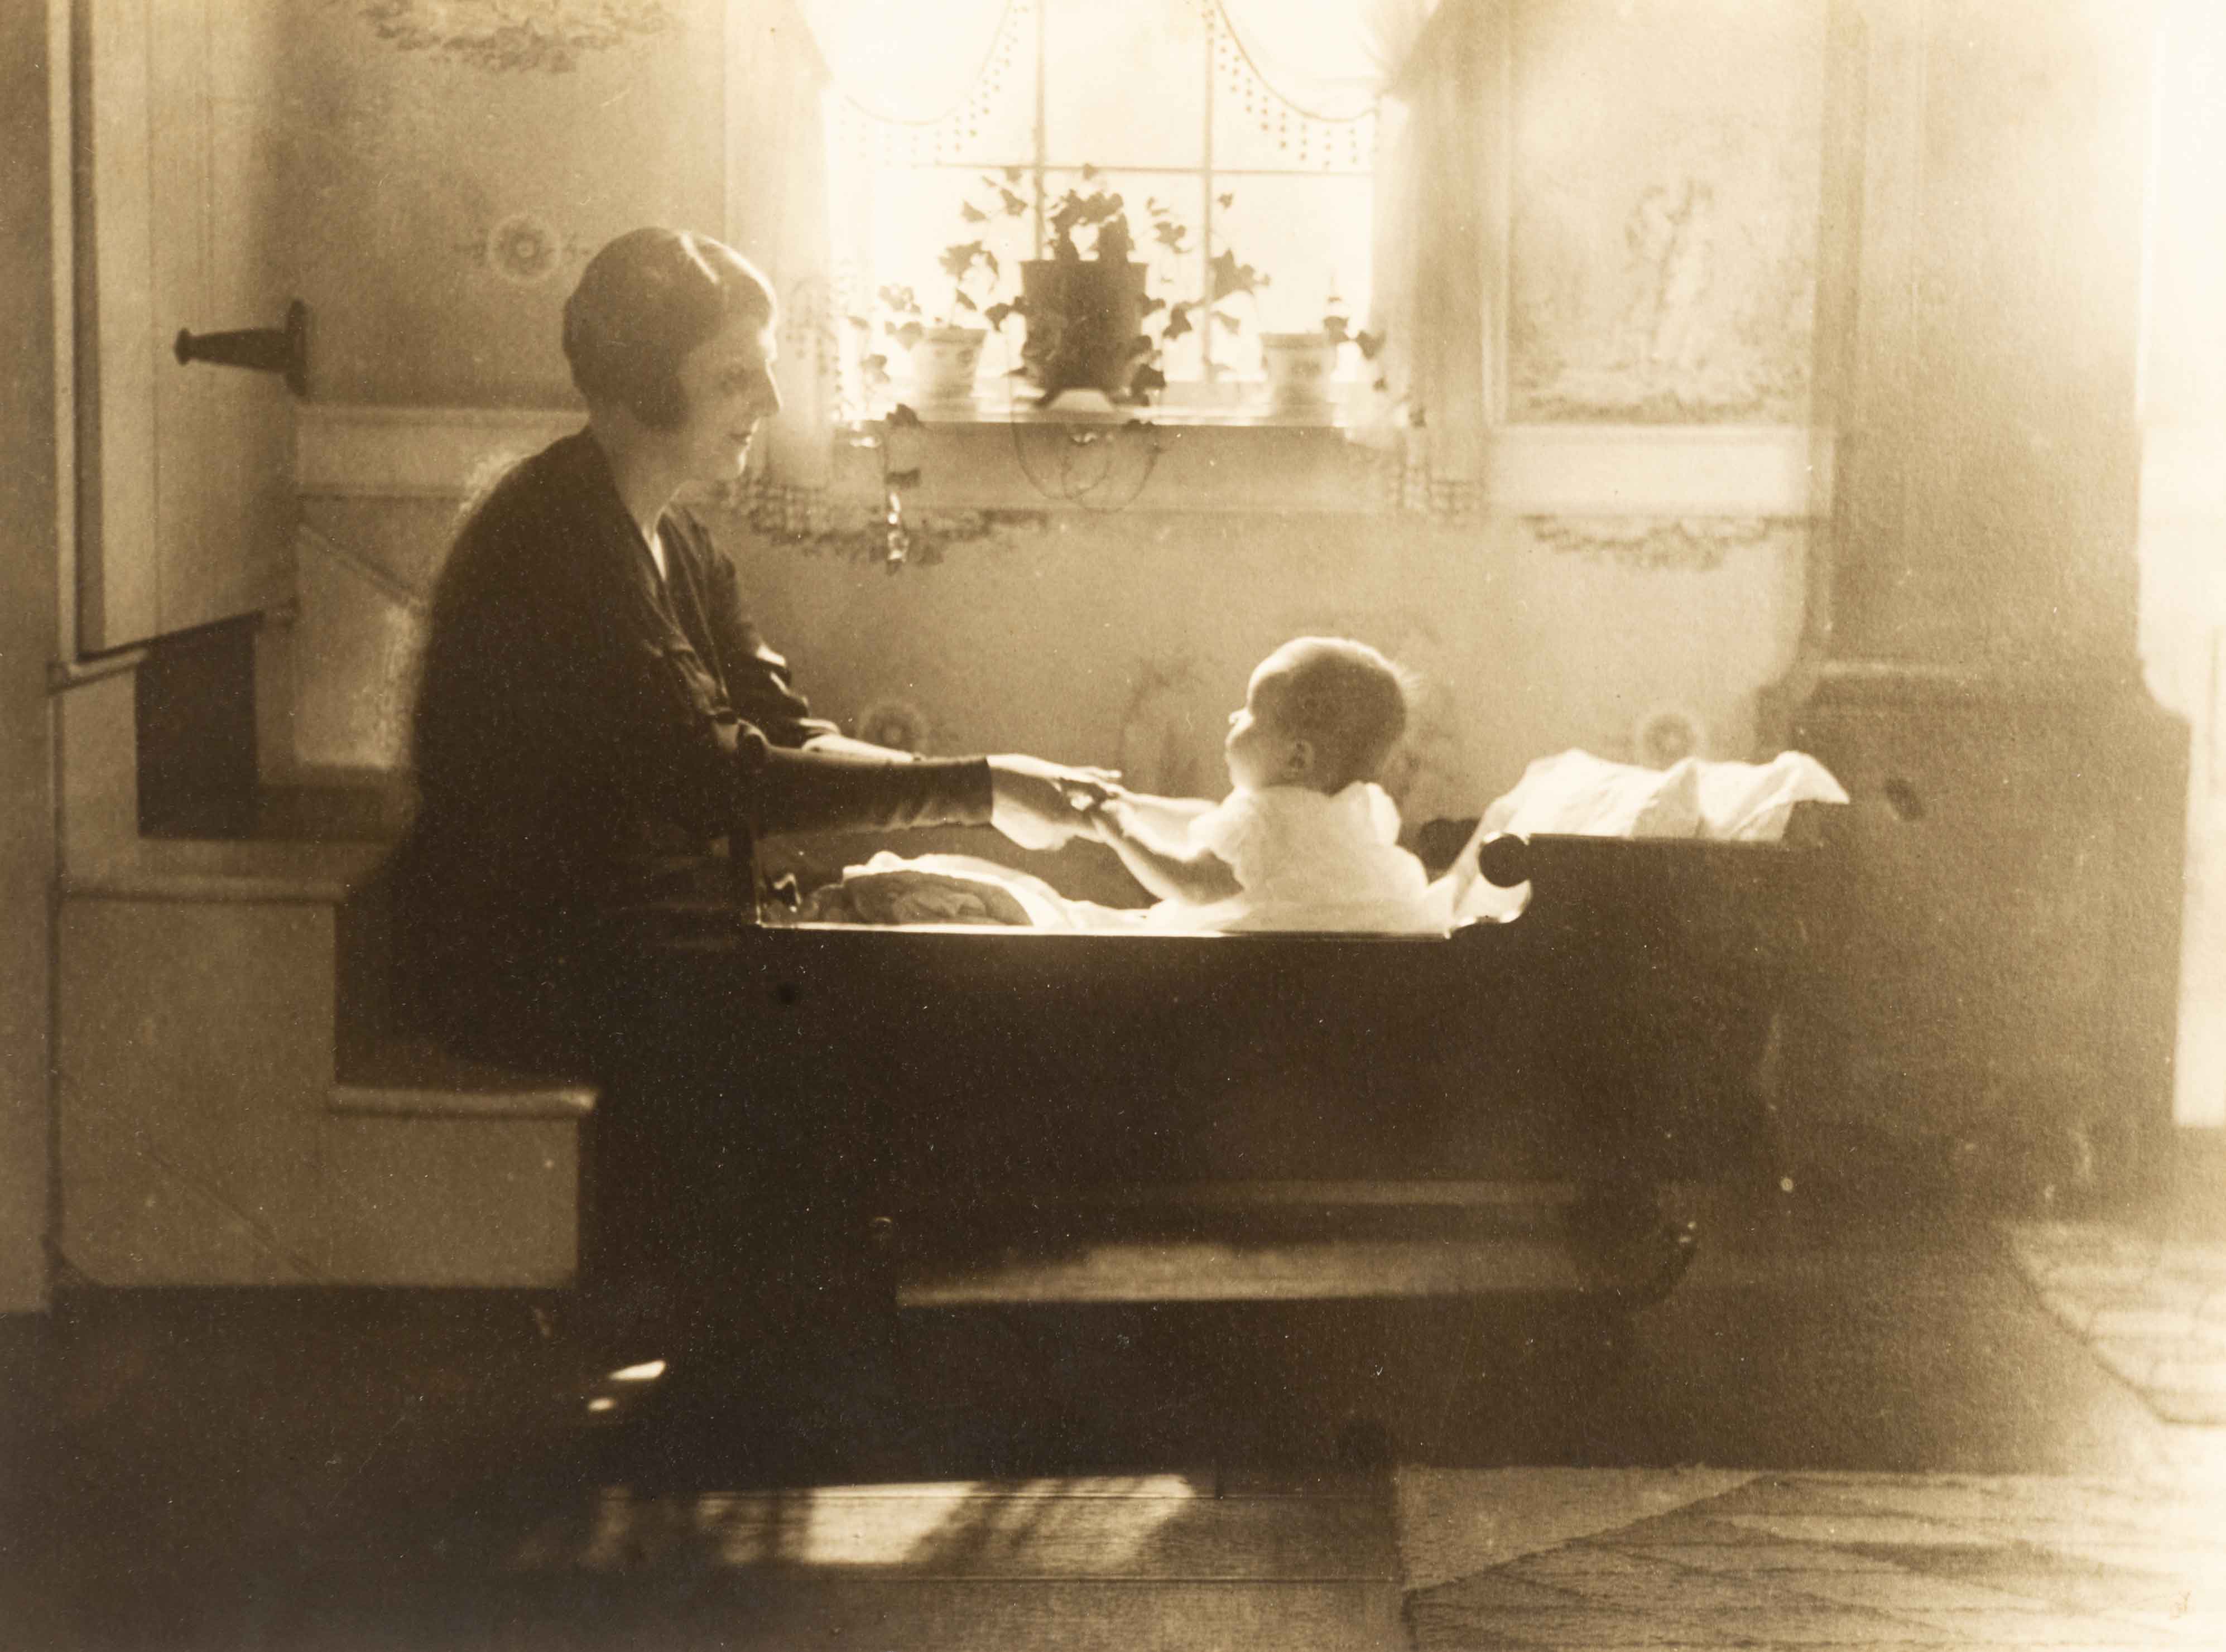 Nancy Ford Cones (American, 1869–1962), Mrs. Lawrence Smith and Baby, 1932, gelatin silver print, 7 3/4 x 9 in. Private collection